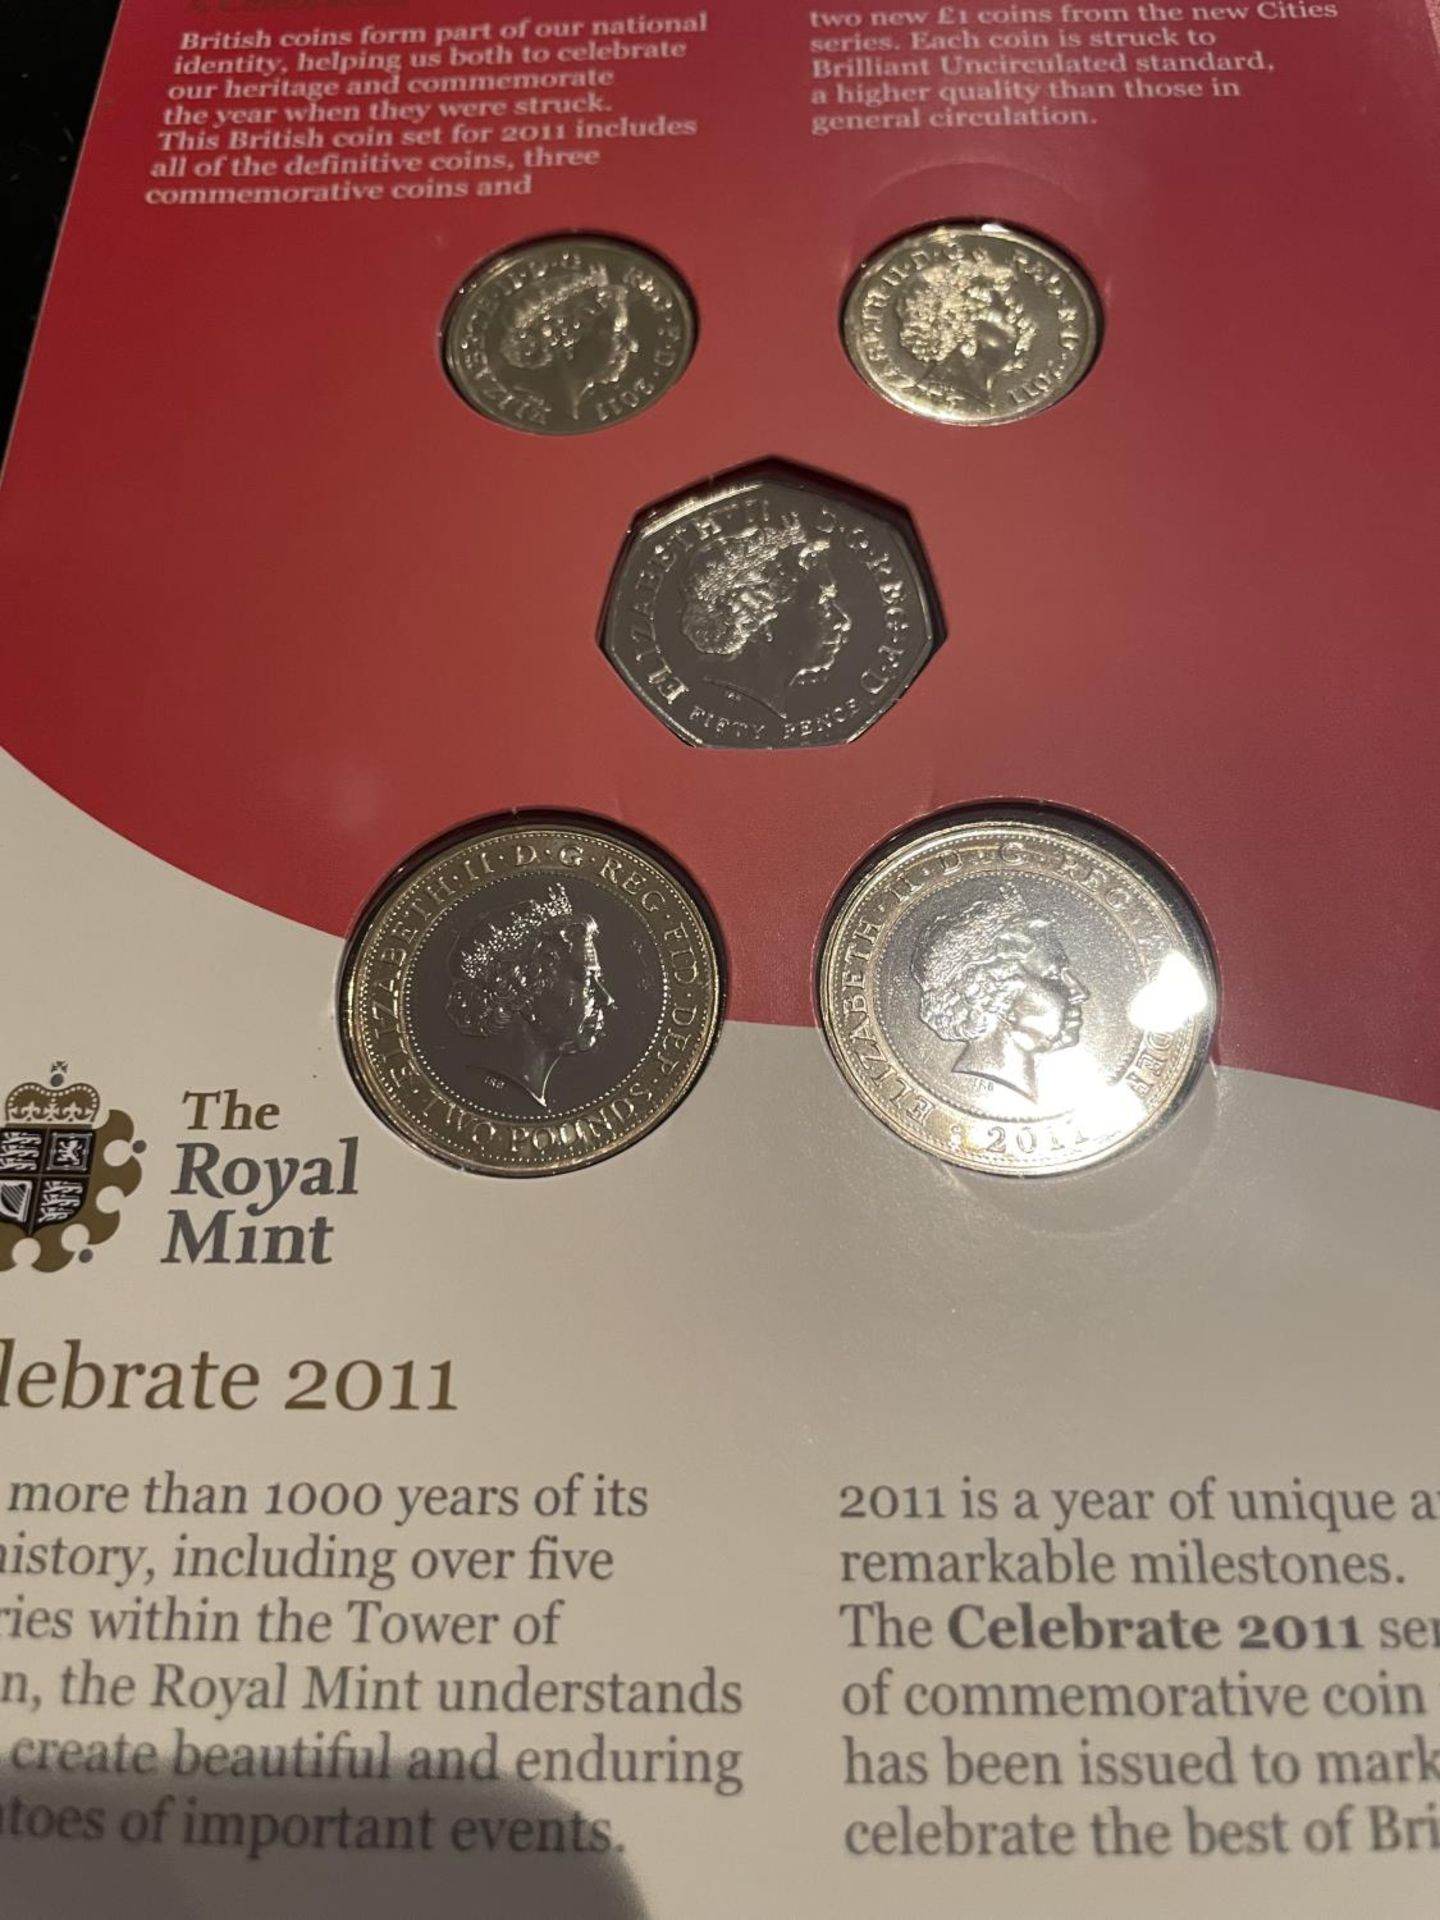 UK , ROYAL MINT , 2011 , COINS OF THE YEAR . PRISTINE CONDITION - Image 4 of 5